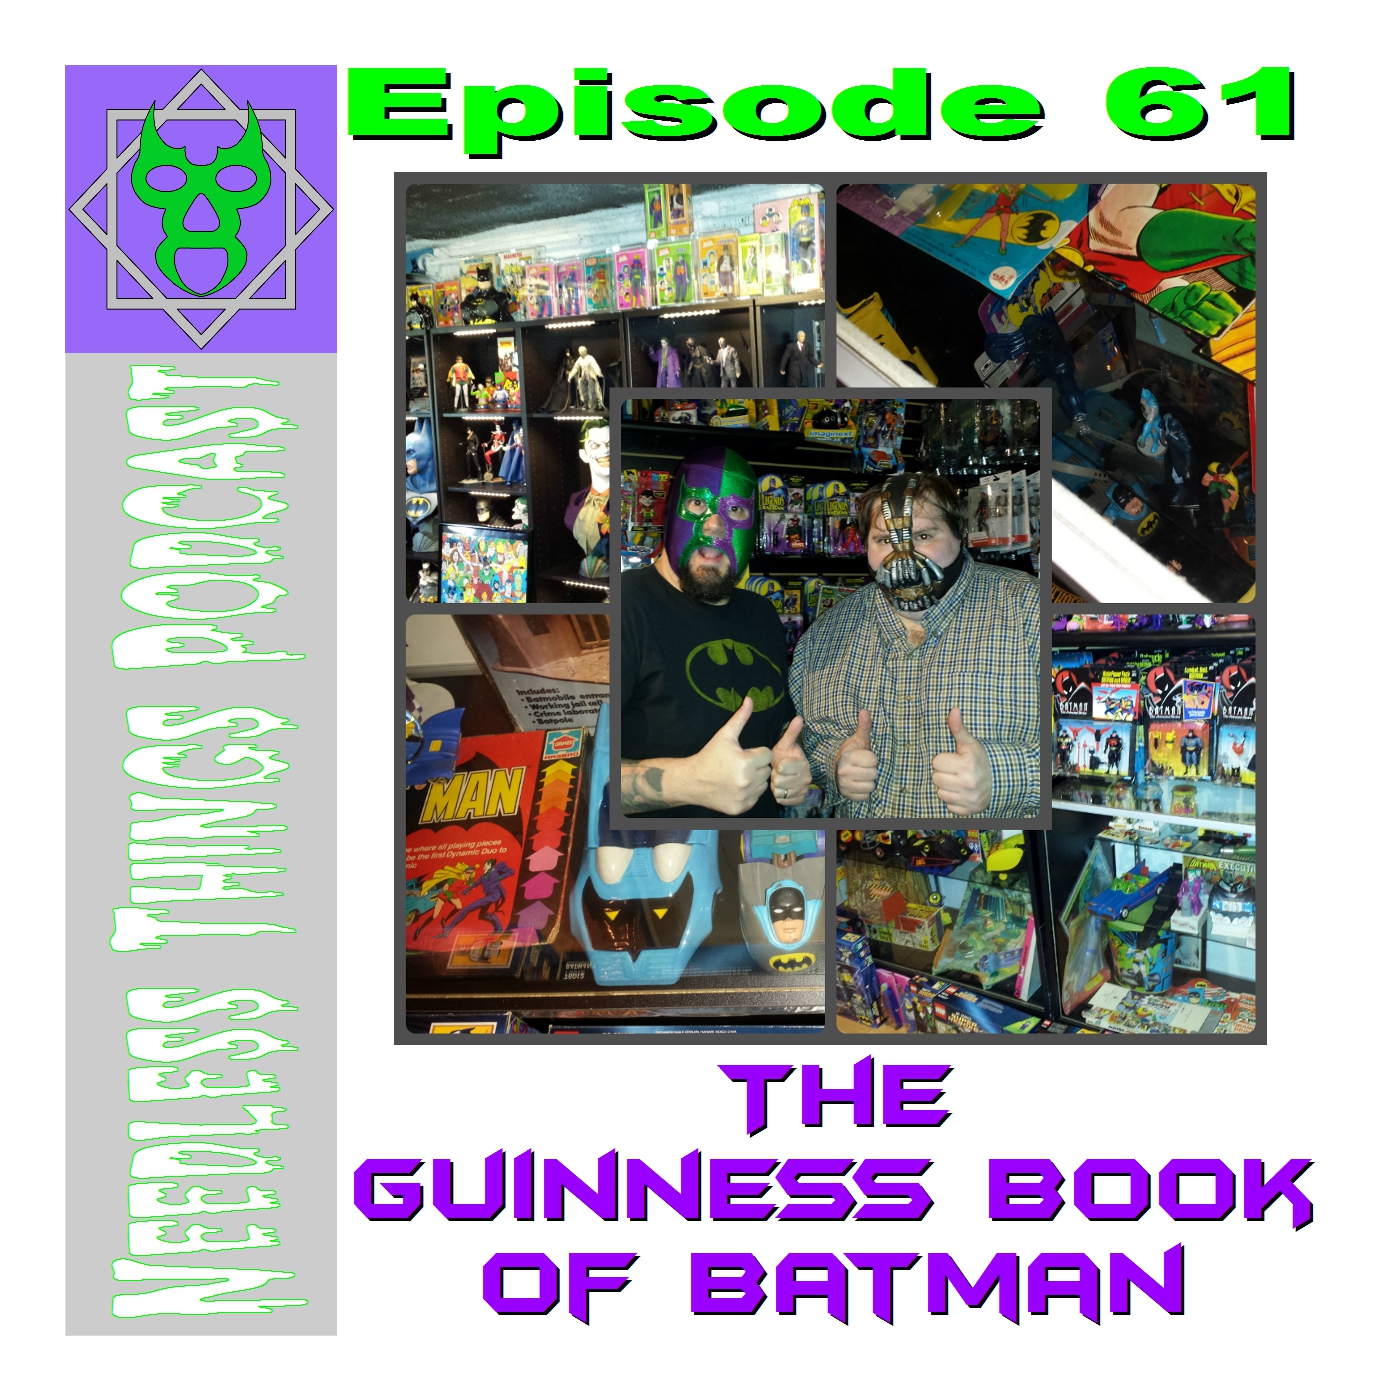 Needless Things Podcast 61 – The Guinness Book of Batman